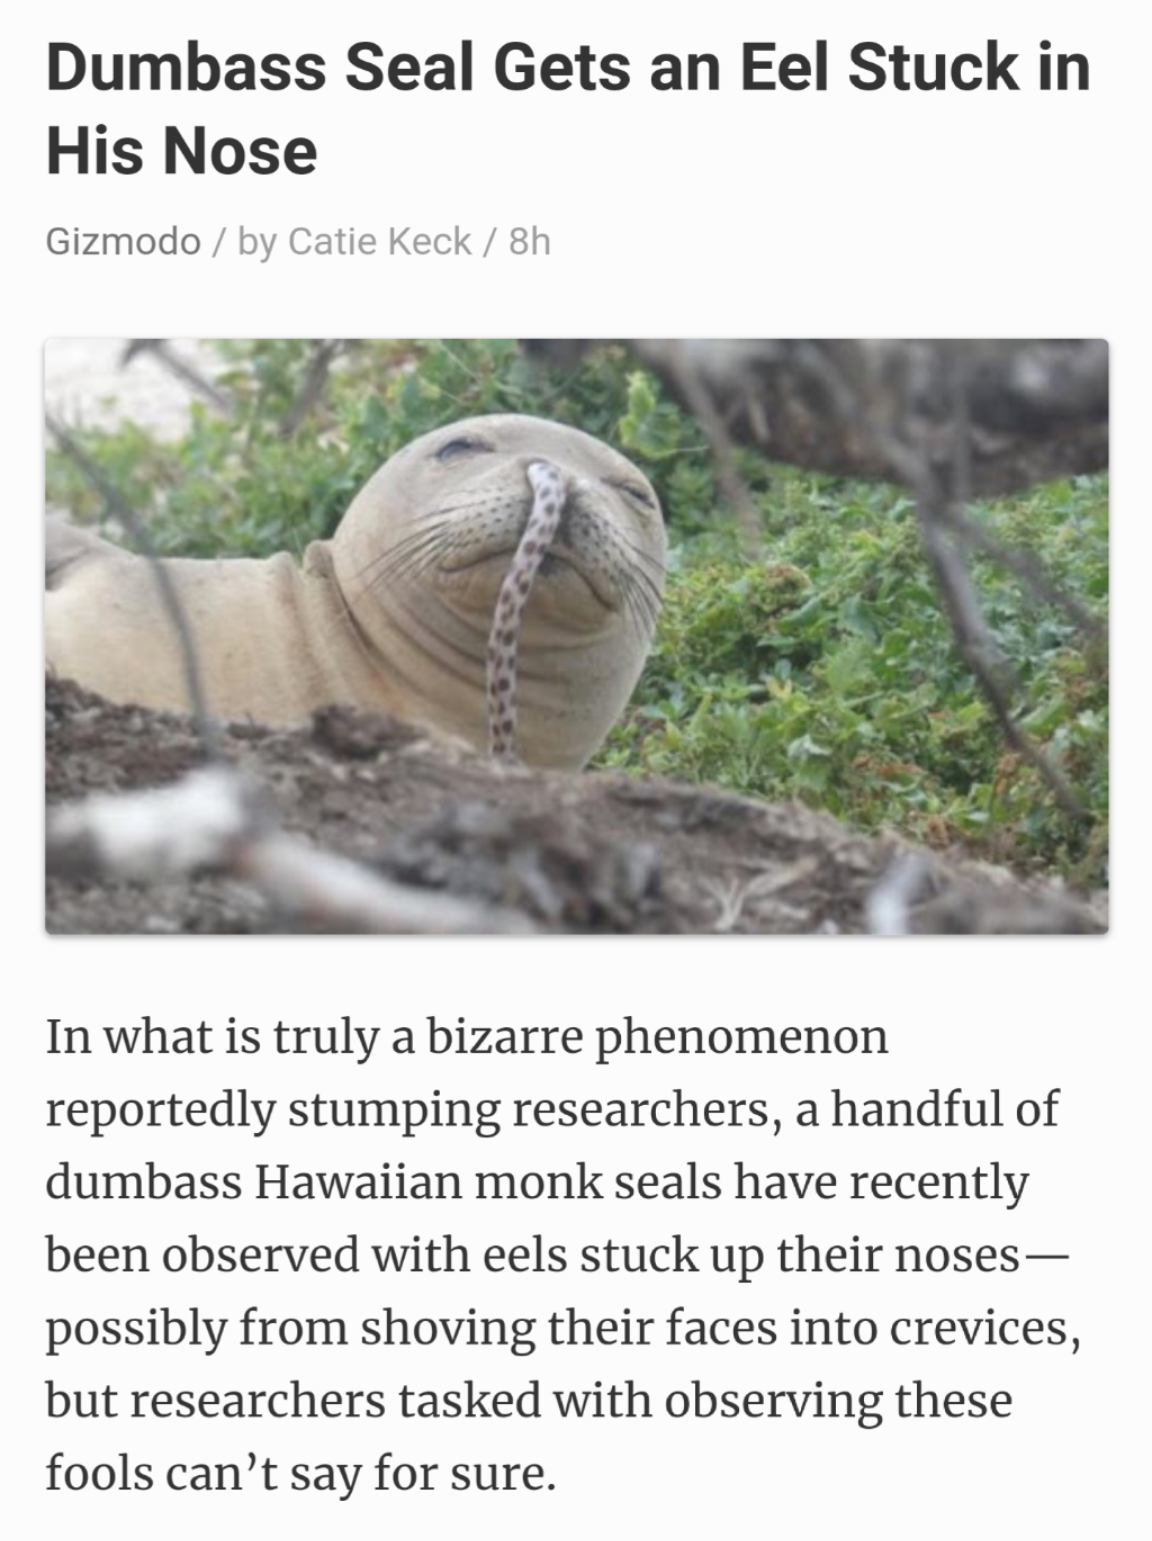 seals snorting eels - Dumbass Seal Gets an Eel Stuck in His Nose Gizmodo by Catie Keck h In what is truly a bizarre phenomenon reportedly stumping researchers, a handful of dumbass Hawaiian monk seals have recently been observed with eels stuck up their n